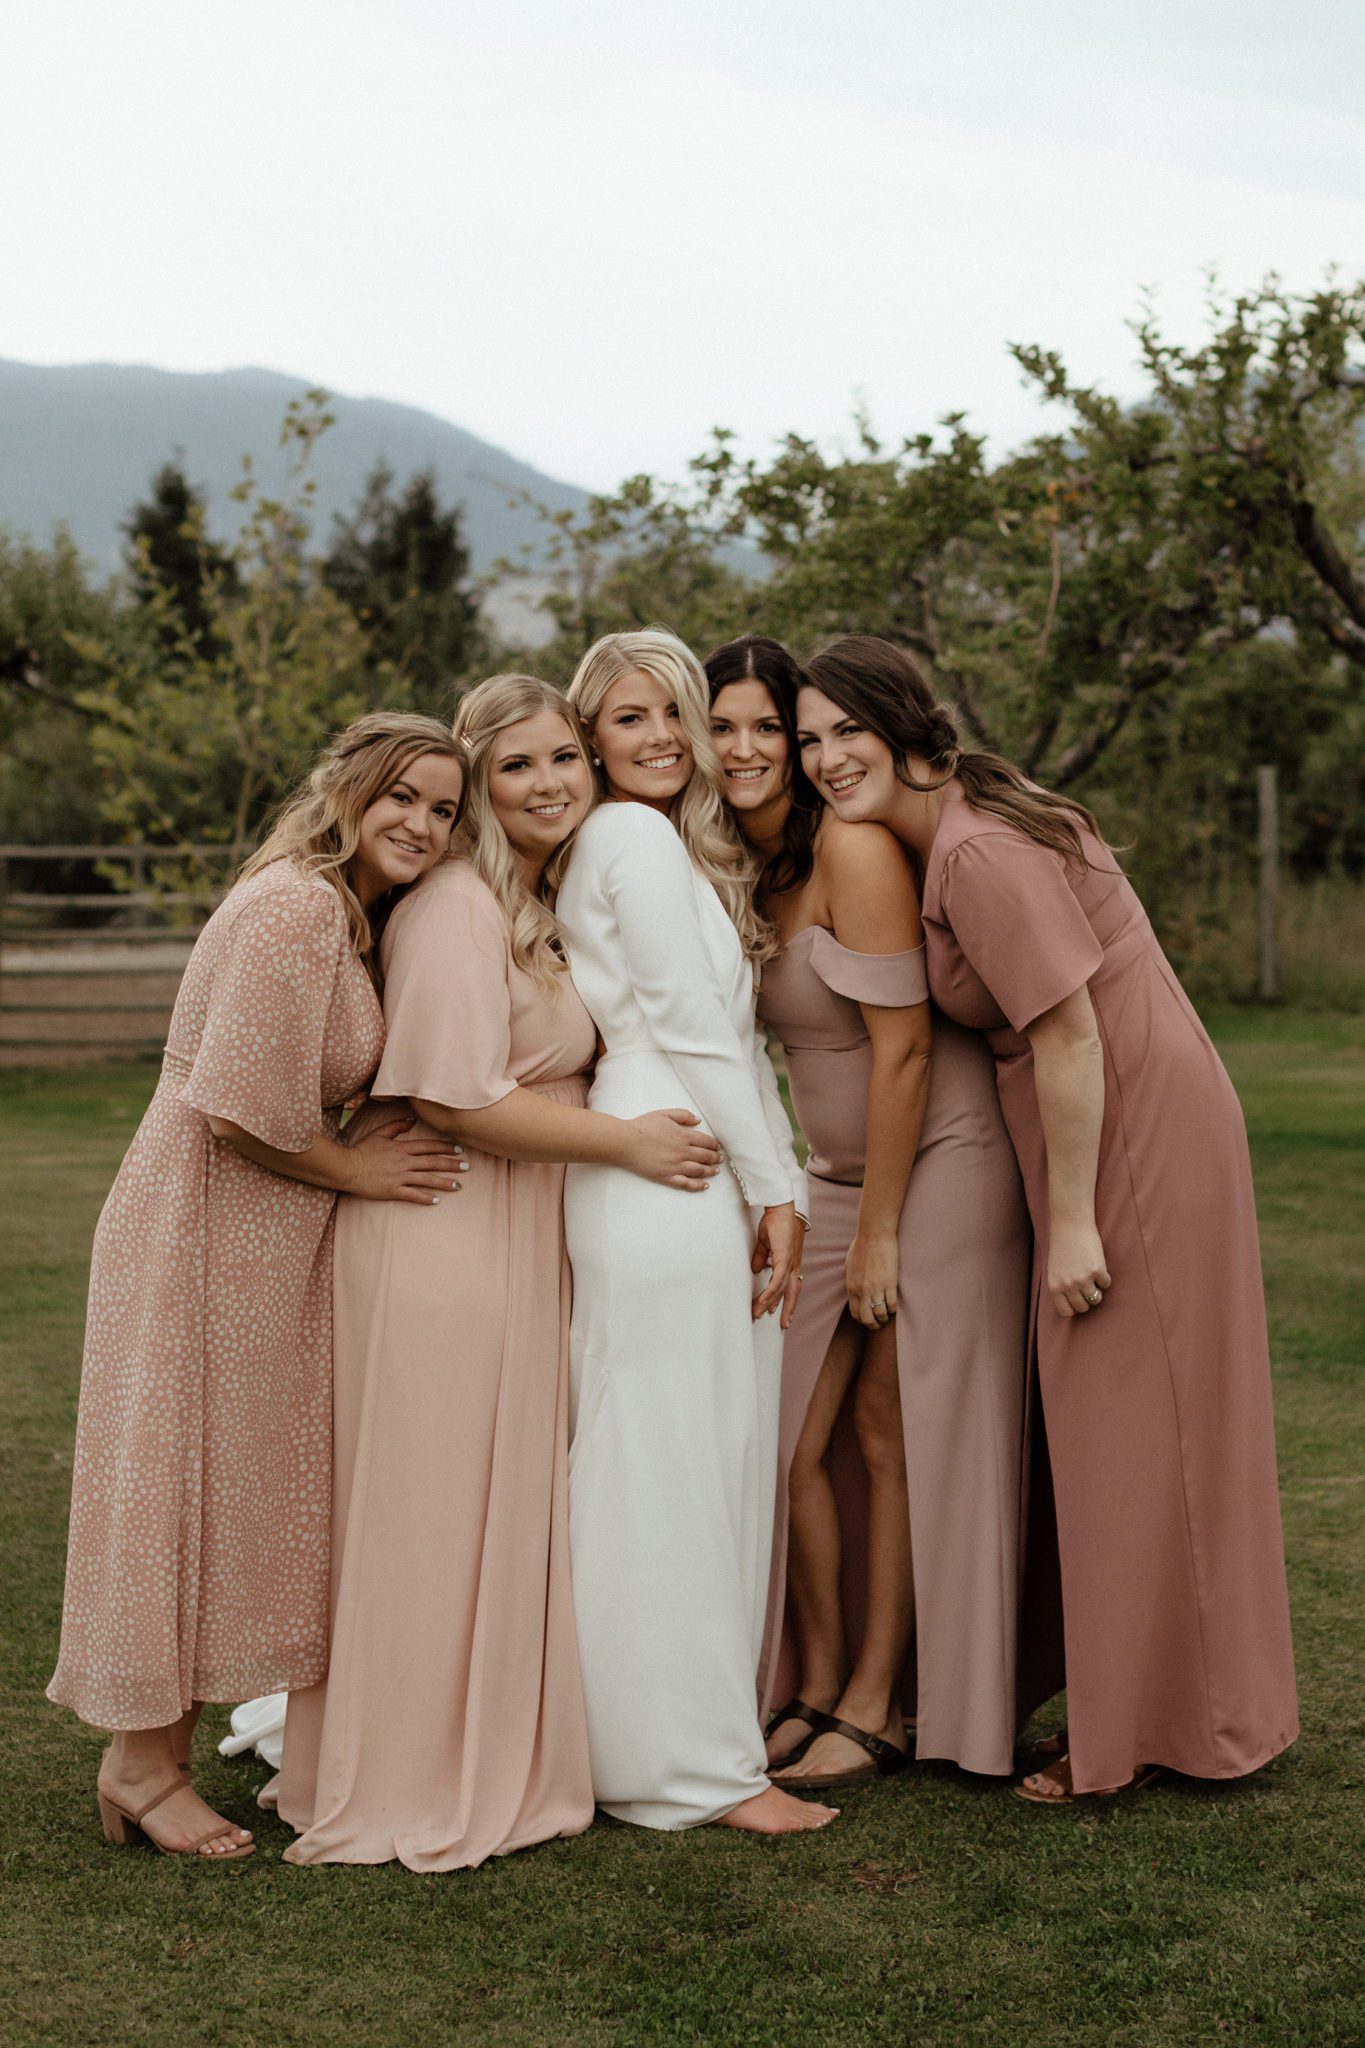 Bridesmaids all in beautiful blush gowns for this Pinterest worthy Okanagan wedding